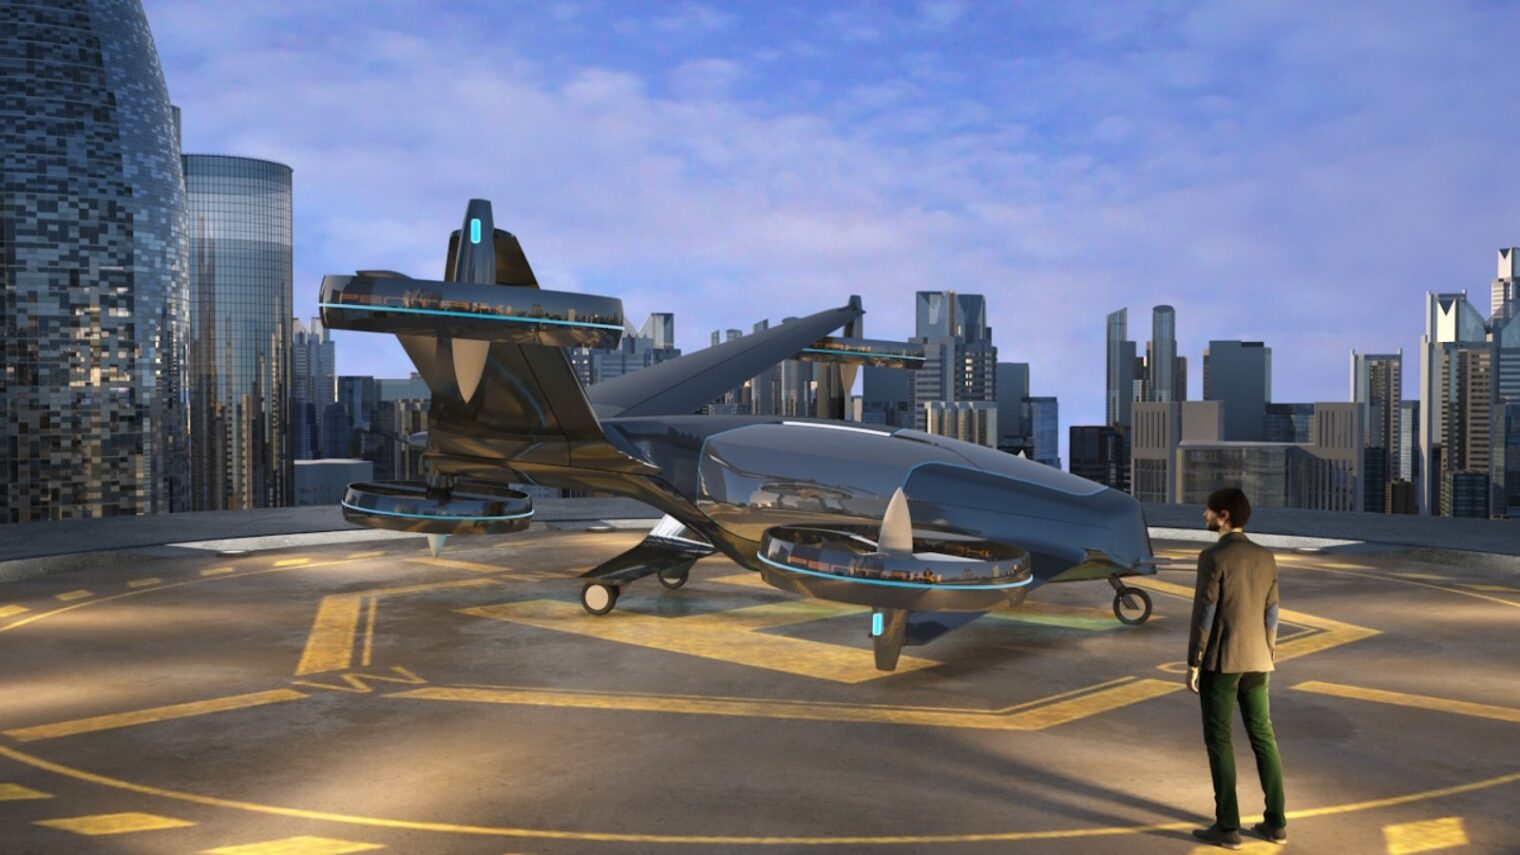 Artist’s rendering of a Pentaxi flying robo-taxi on a heliport. Image courtesy of Pentaxi